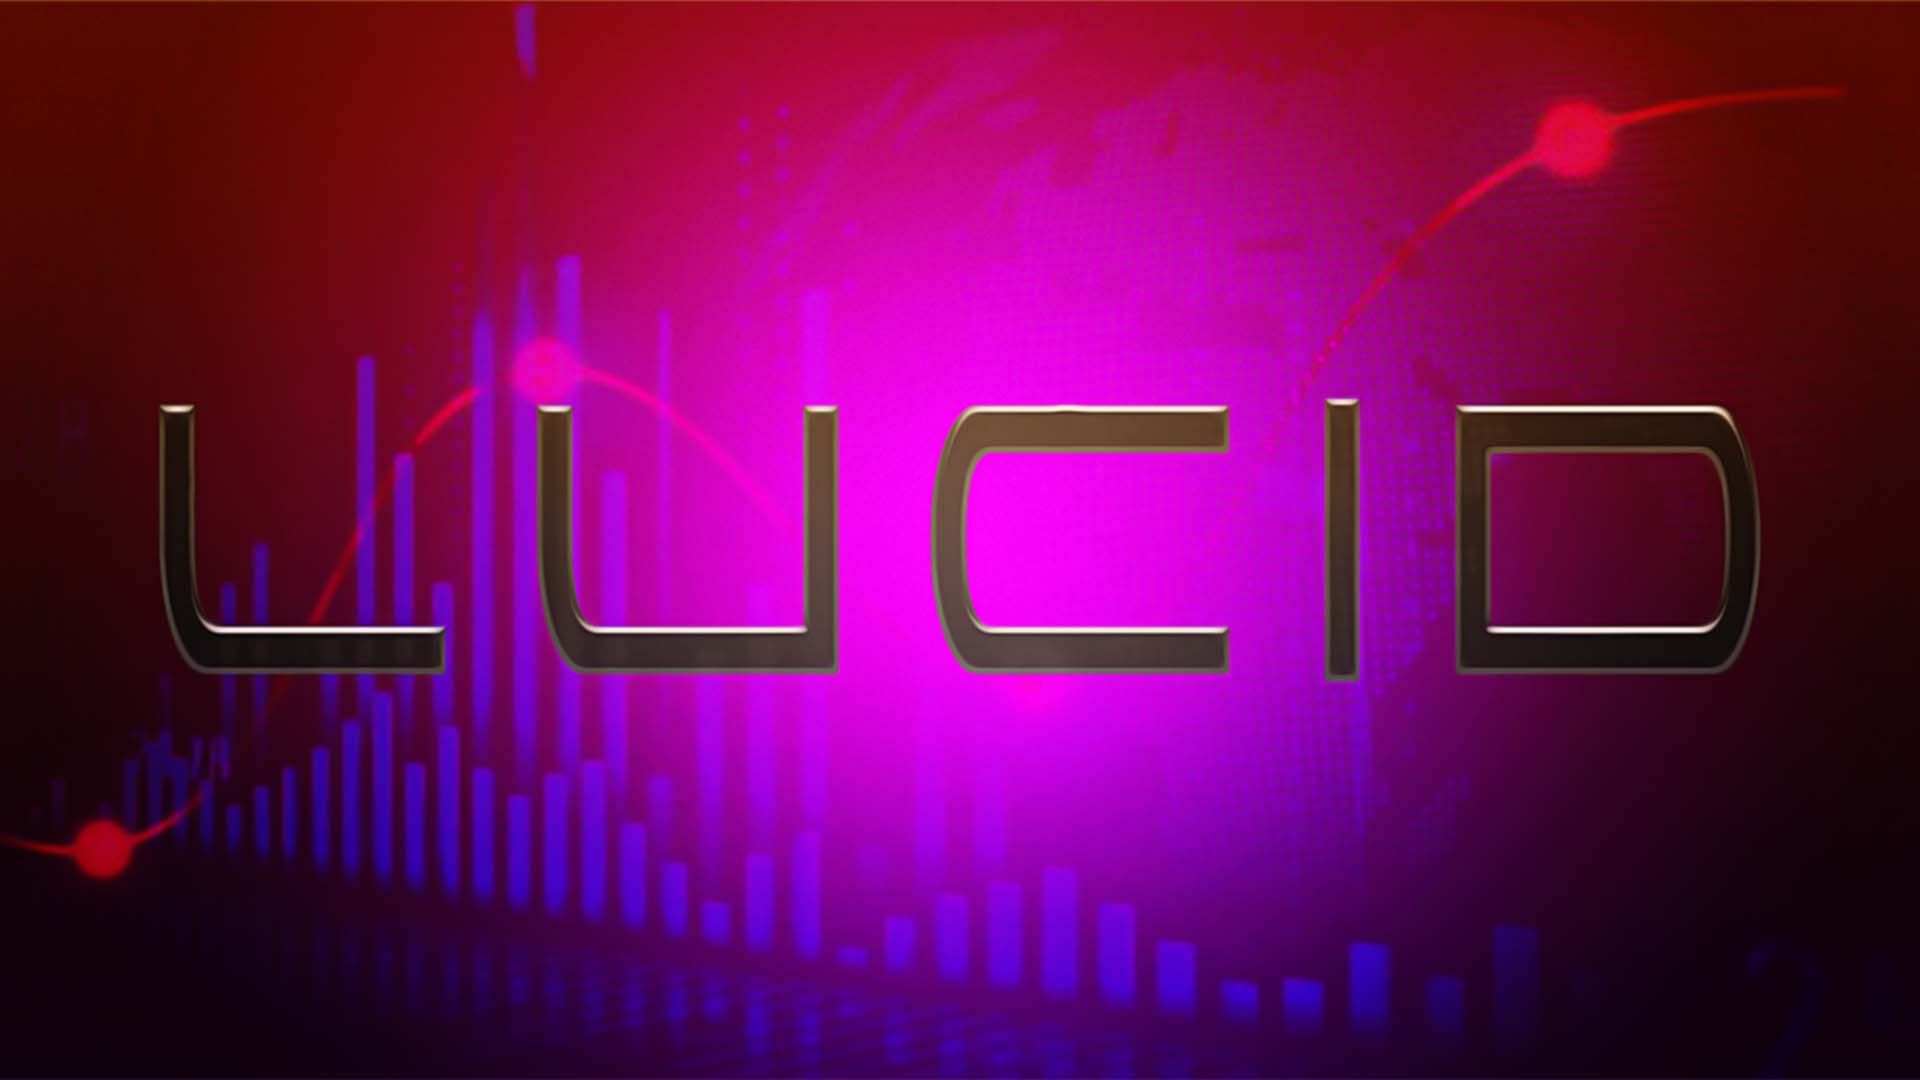 Lucid (LCID) Stock Price Plunged Nearly 80%, Should You Keep It in the Portfolio?